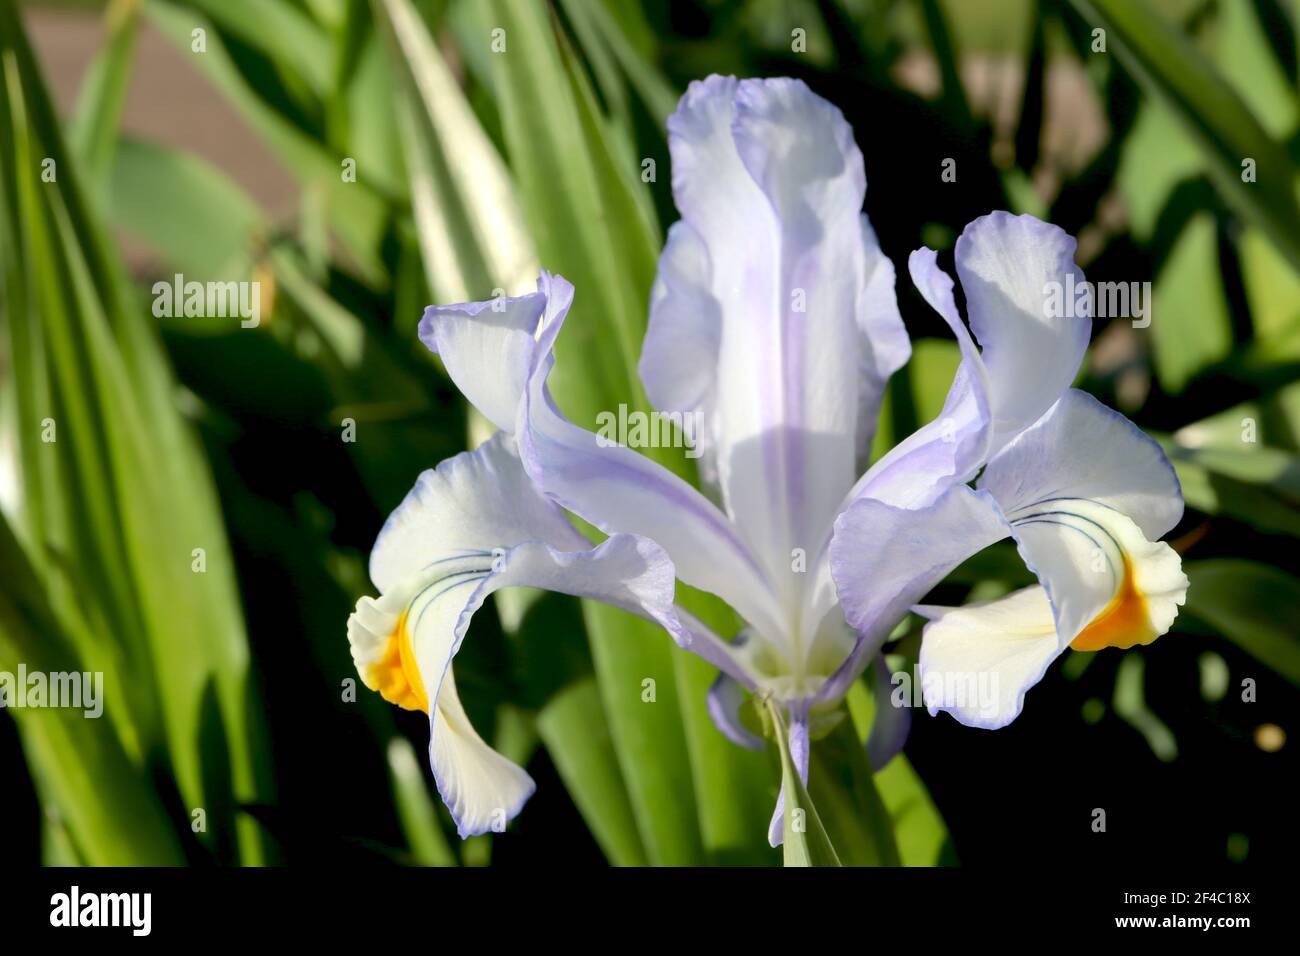 Iris magnifica Juno Juno Beardless Iris – pale blue lilac flowers with white yellow crests,  March, England, UK Stock Photo